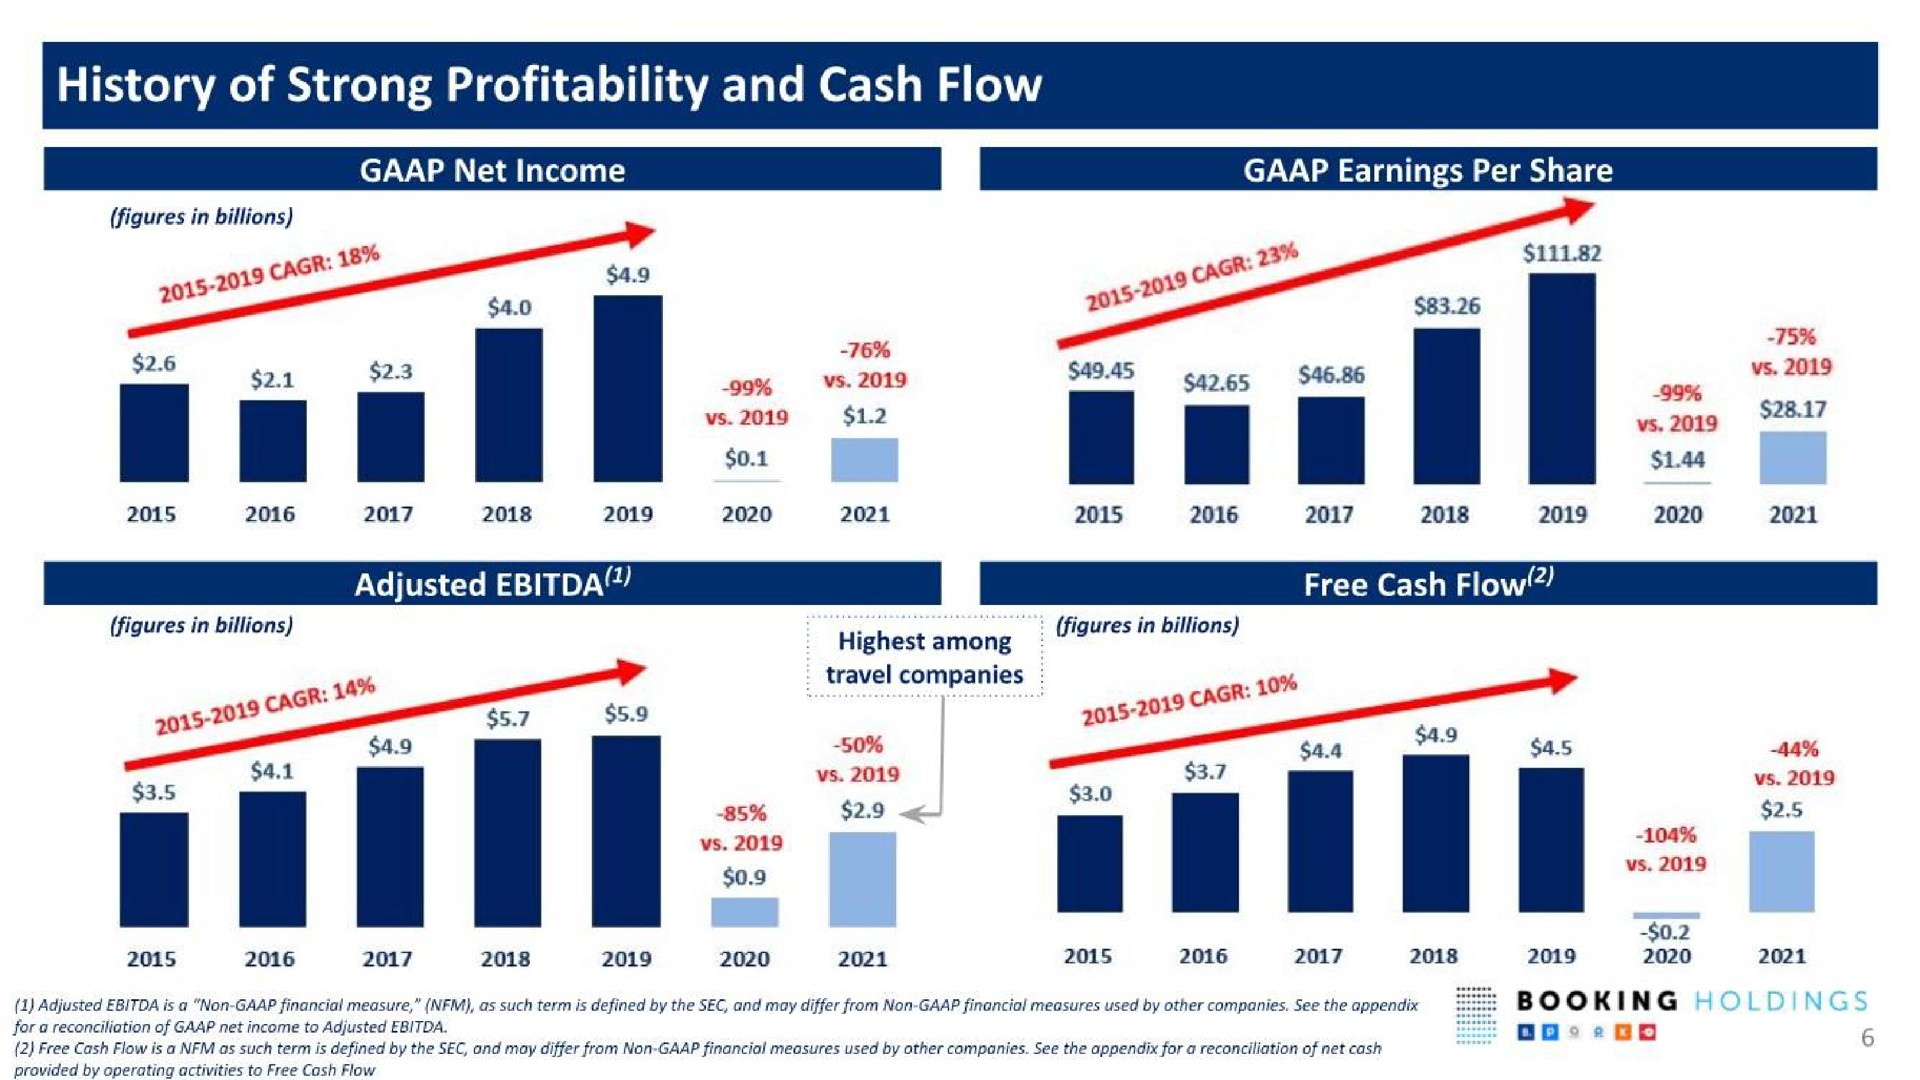 history of strong profitability and cash flow | Booking Holdings